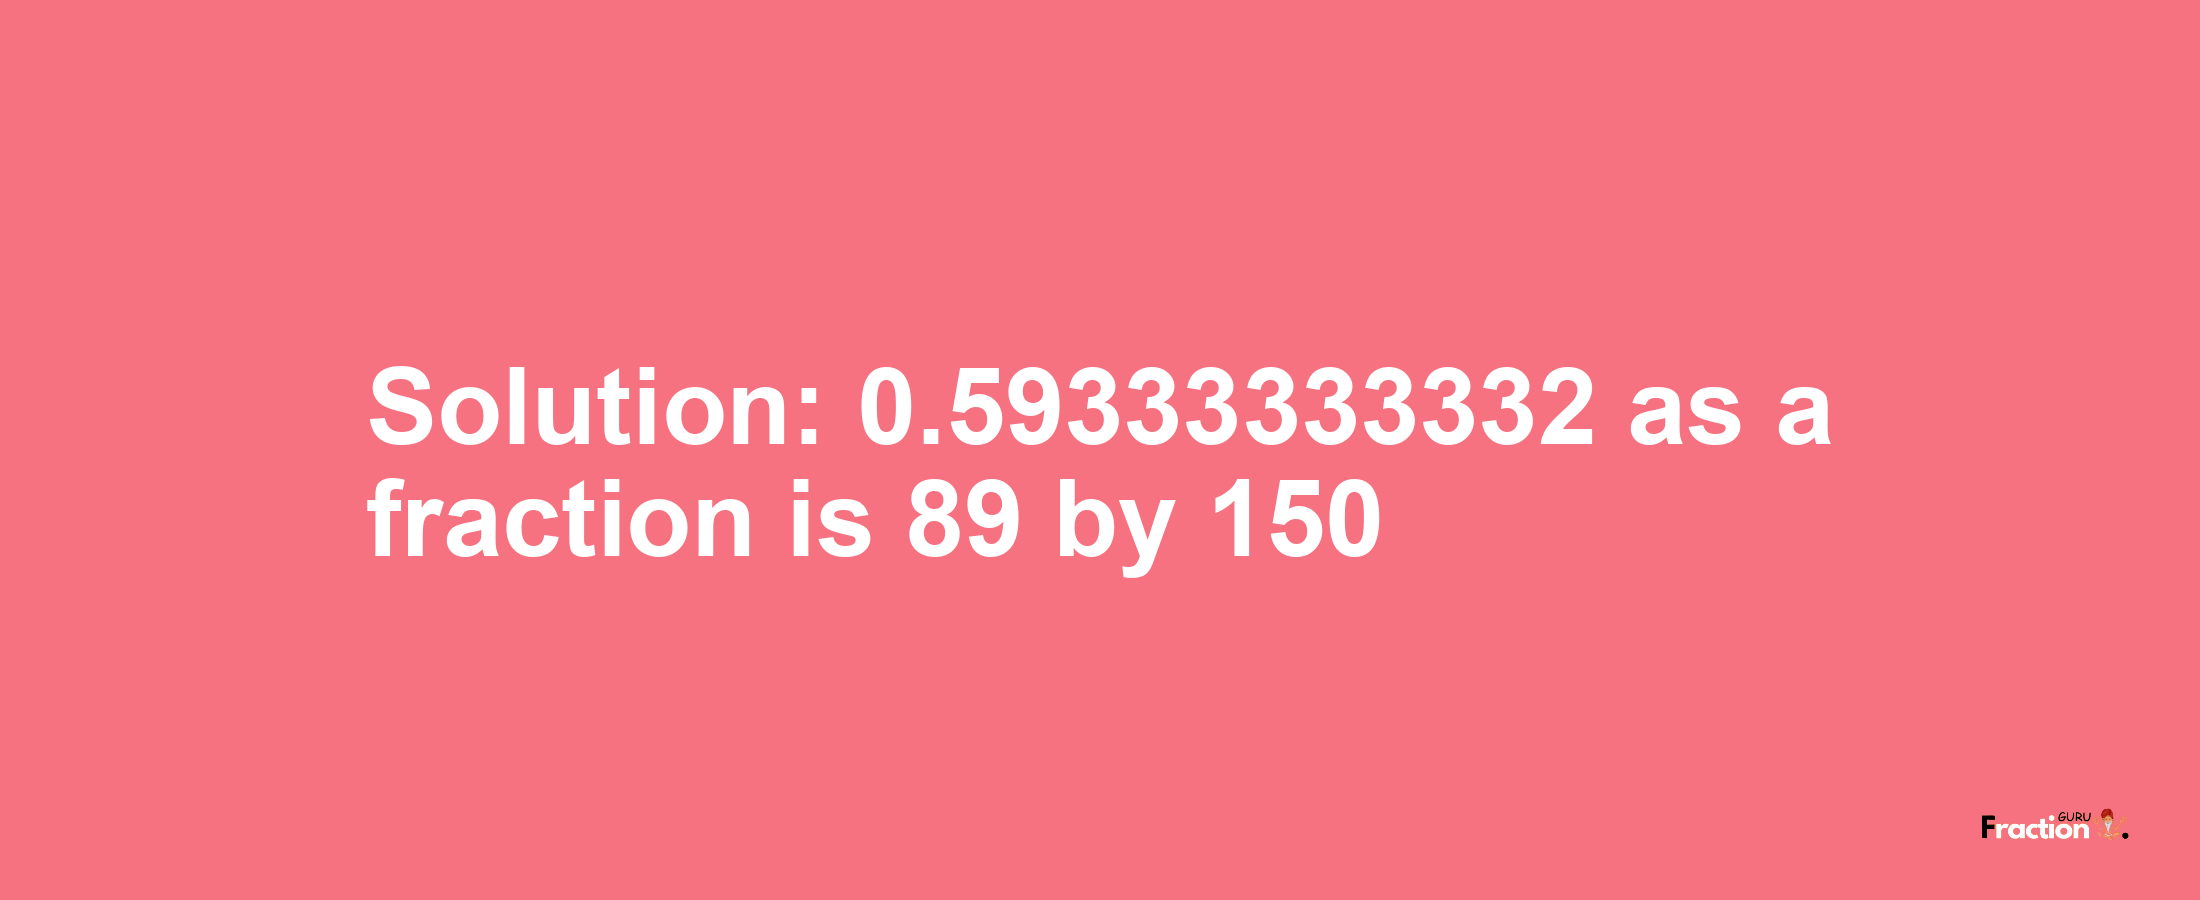 Solution:0.59333333332 as a fraction is 89/150